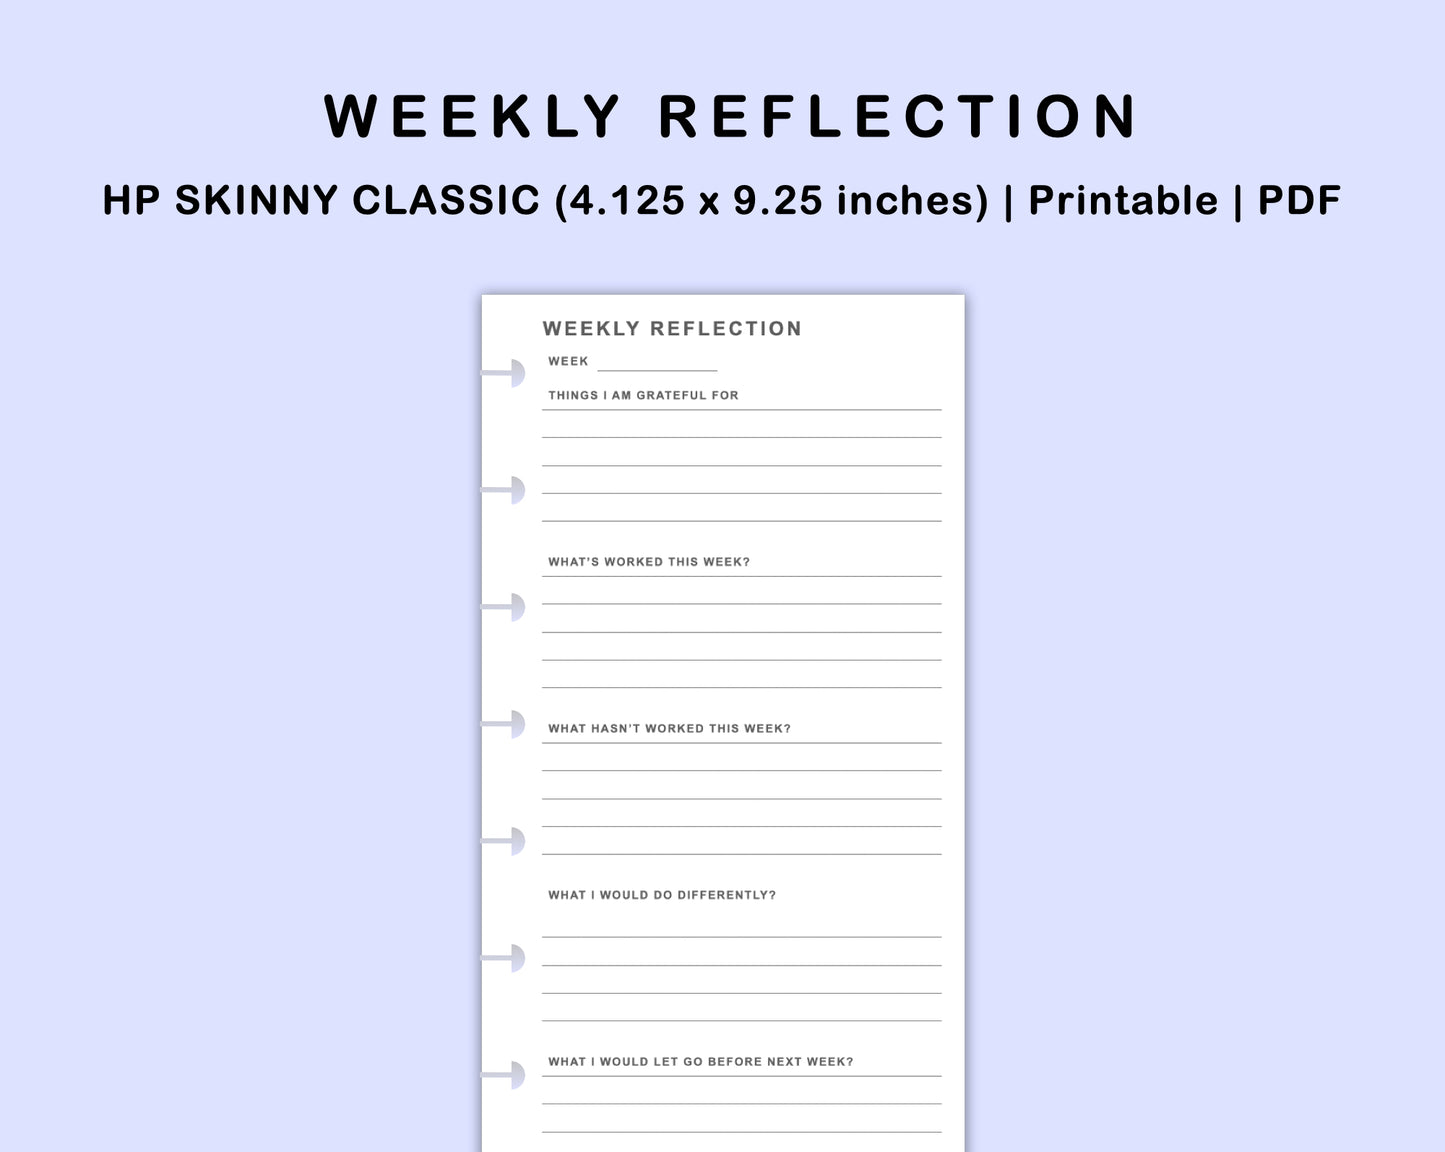 Skinny Classic HP Inserts - Weekly Reflection